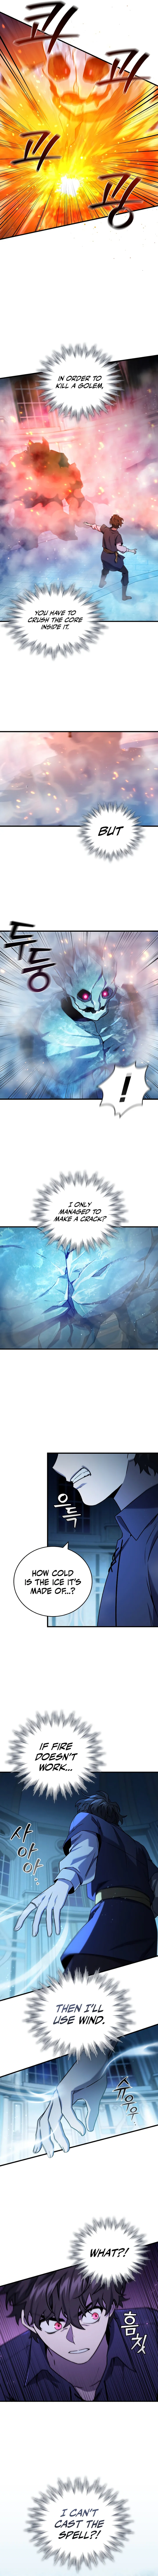 Dragon-Devouring Mage - Chapter 9 Page 8